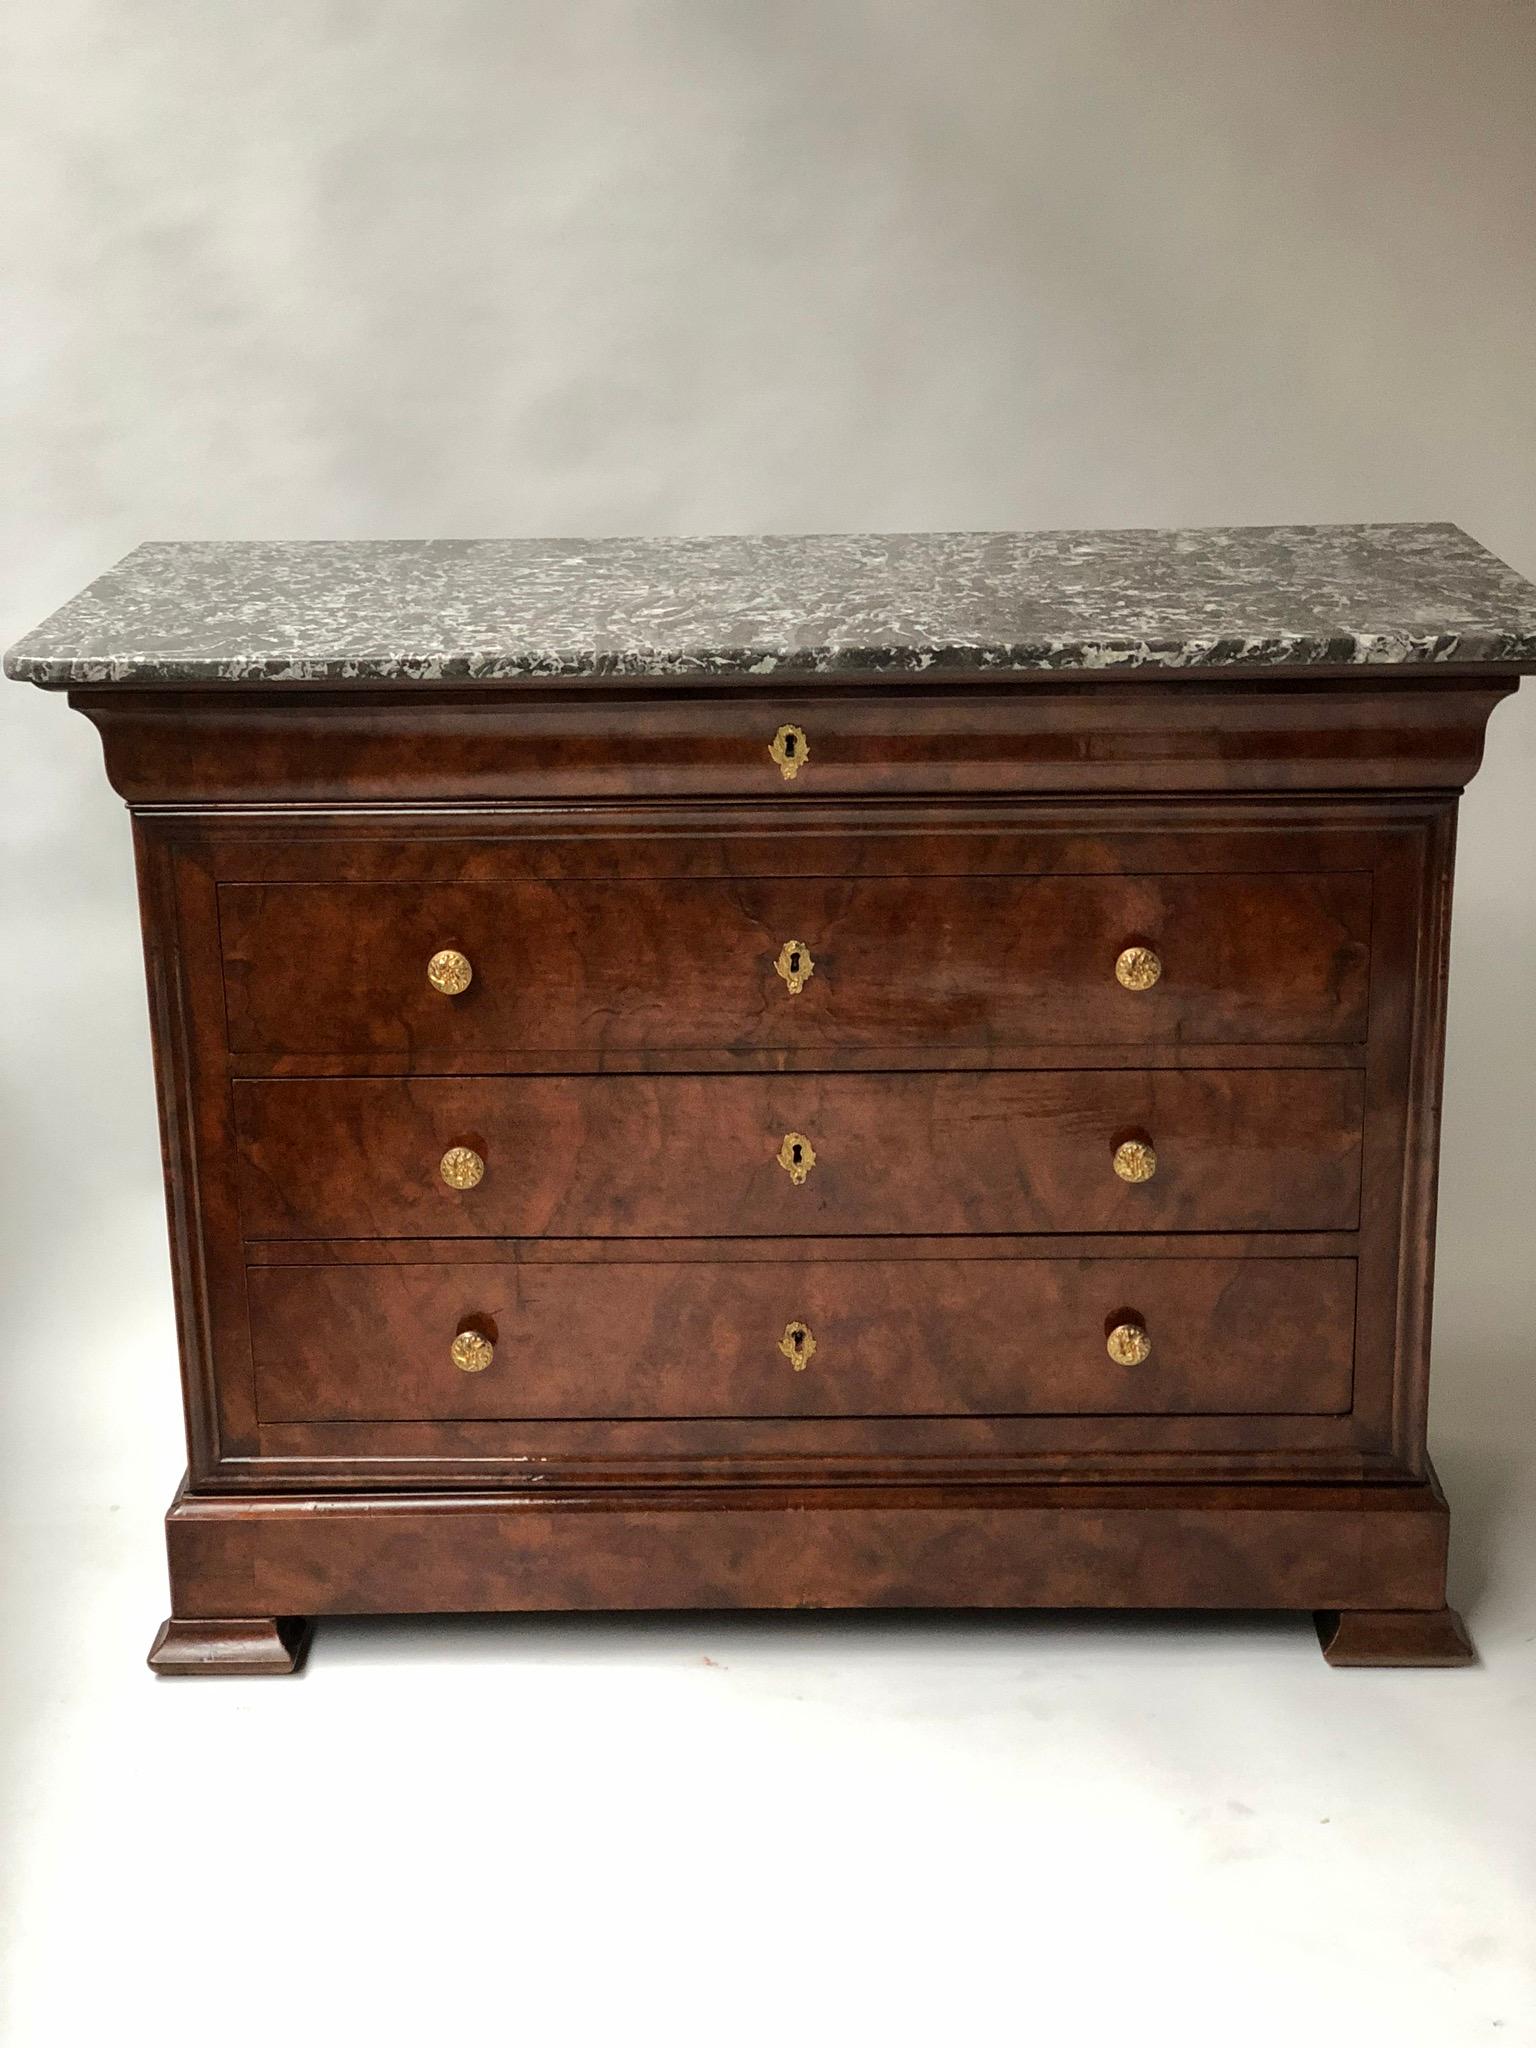 19th century French Louis Philippe figured walnut and gilt metal mounted commode with grey white variegated St Anne’s marble above five long drawers including a shaped frieze drawer and concealed raised plinth drawer
Fabulous original marble and